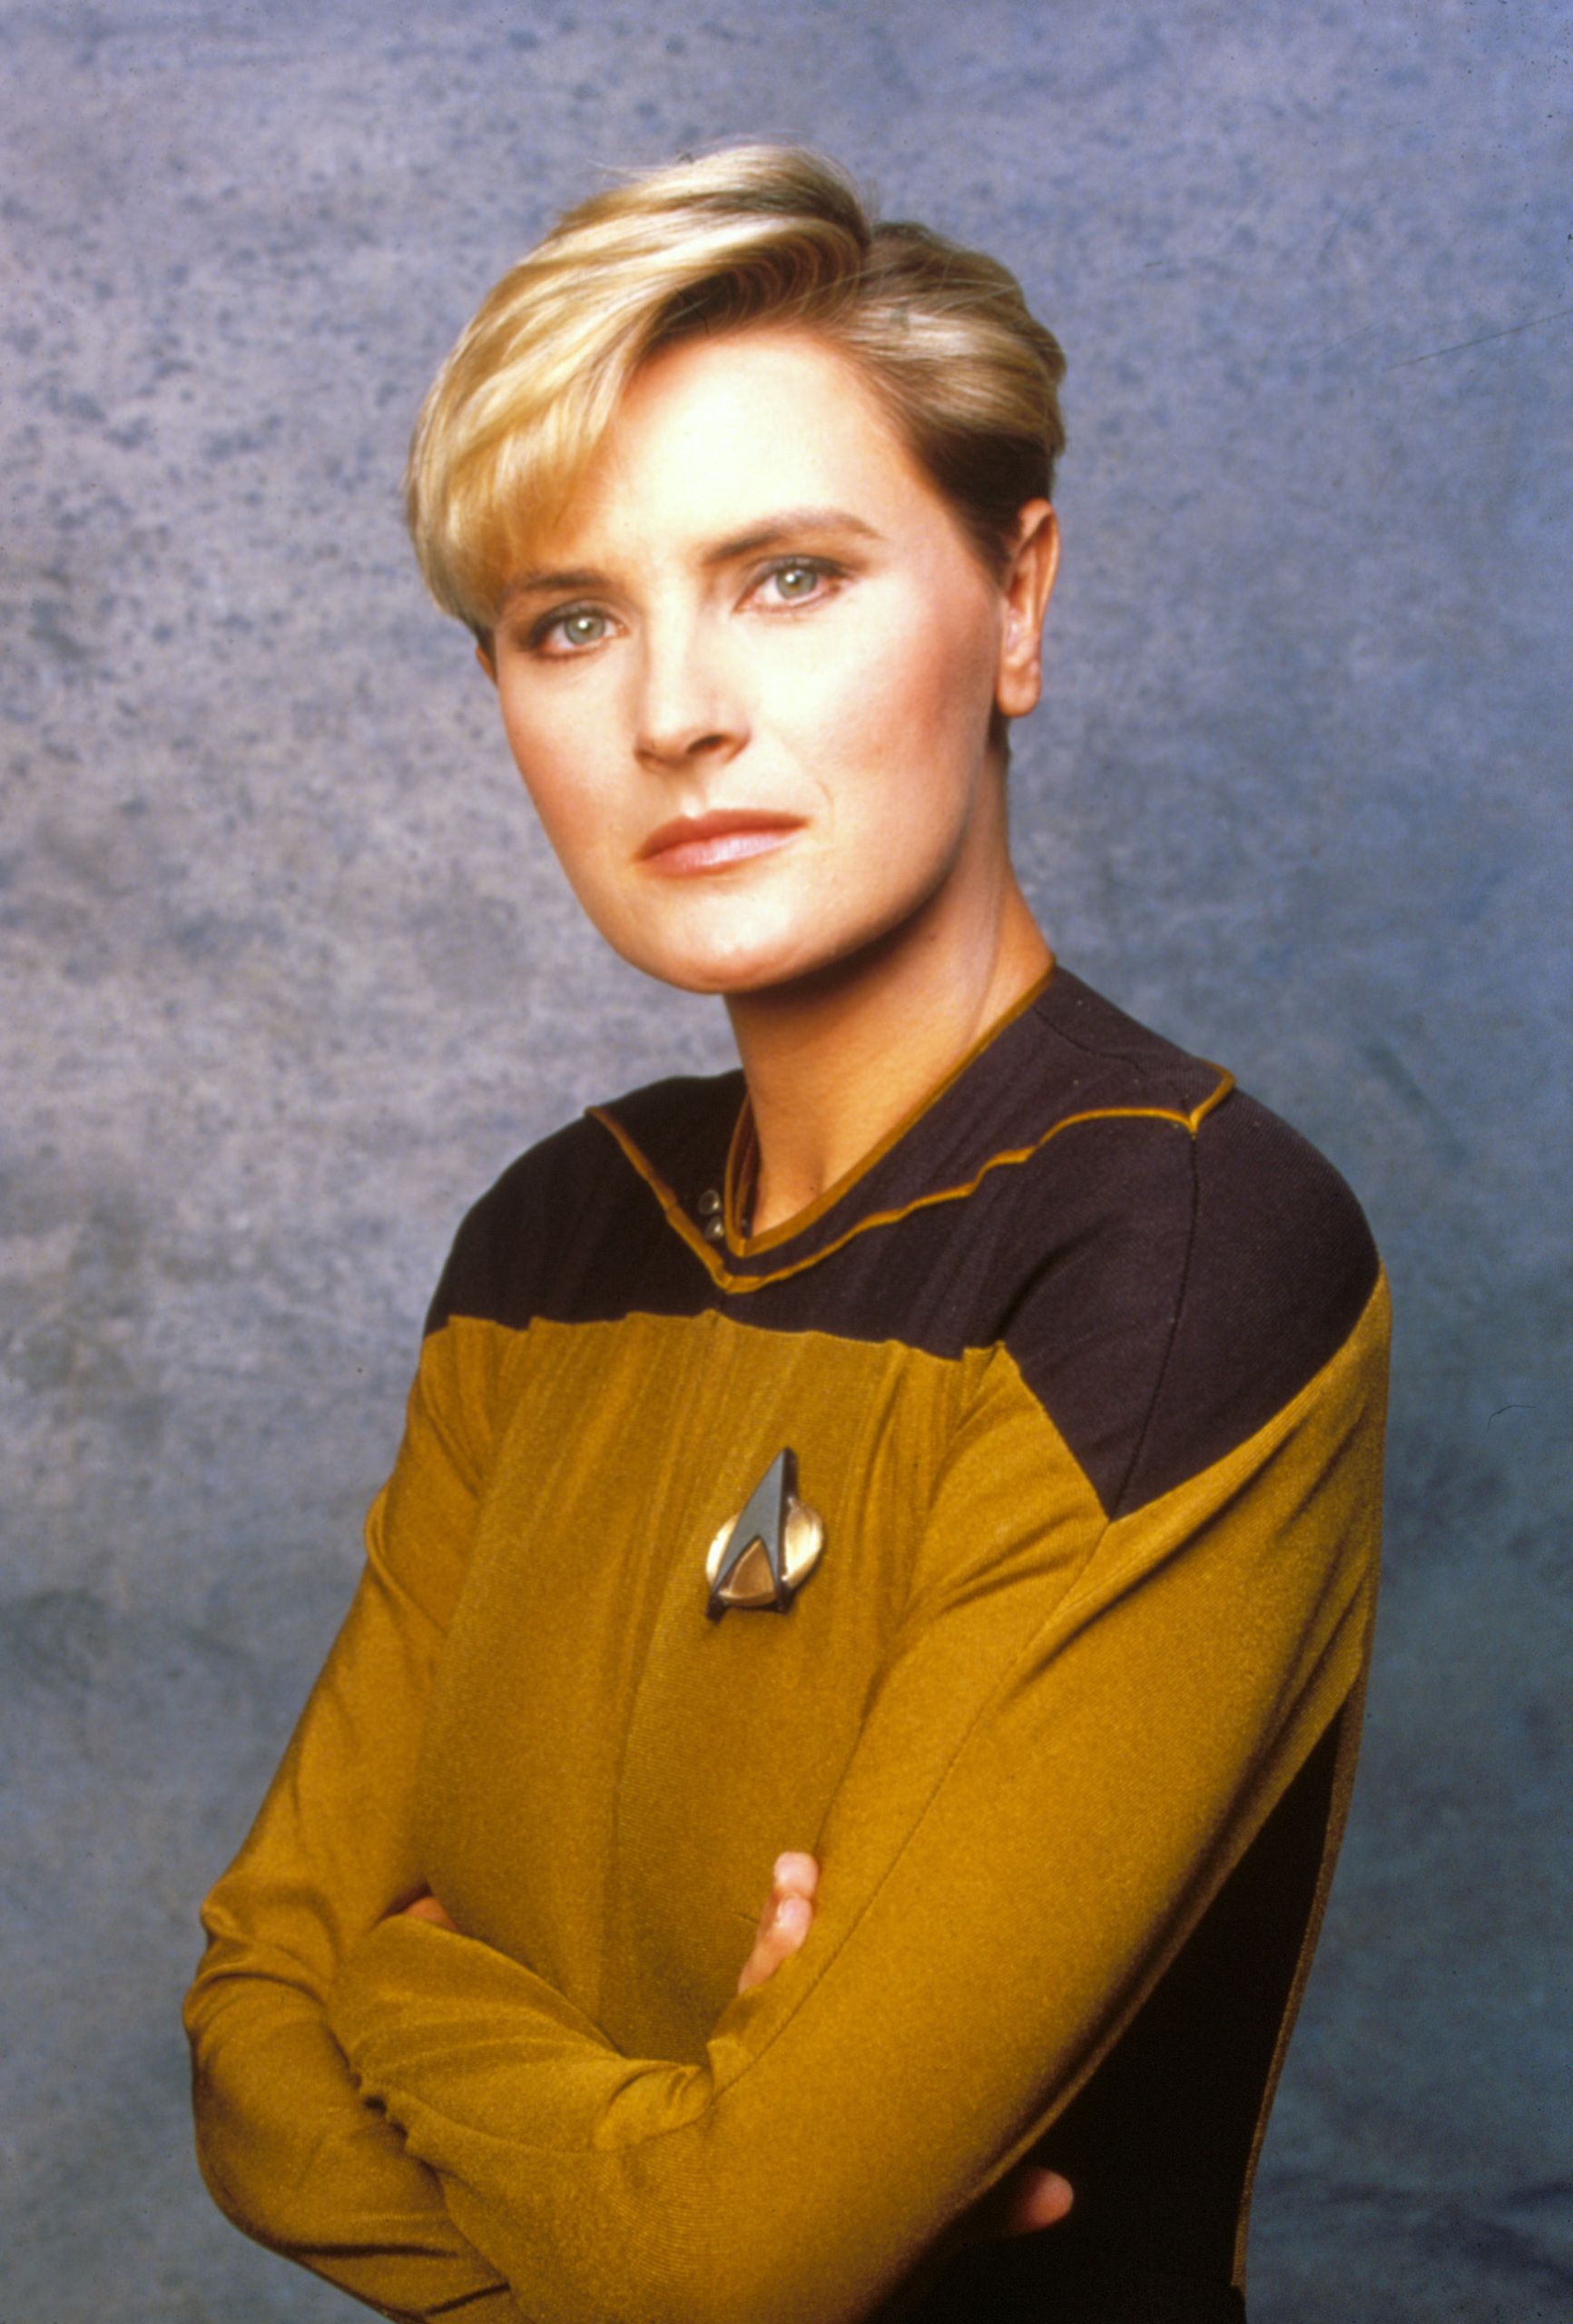 denise-crosby-pictures